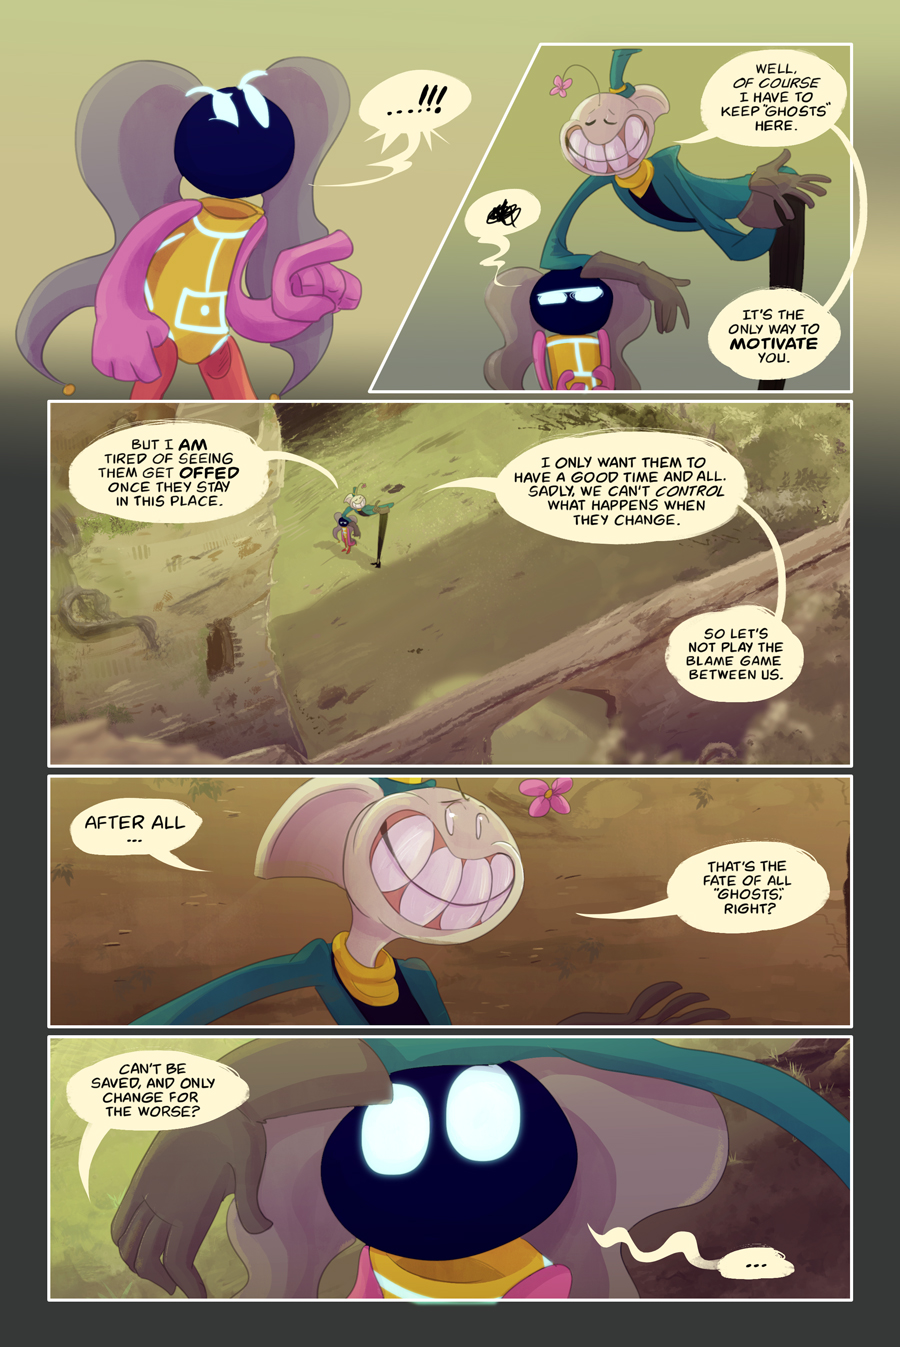 Chapter 5, page 33